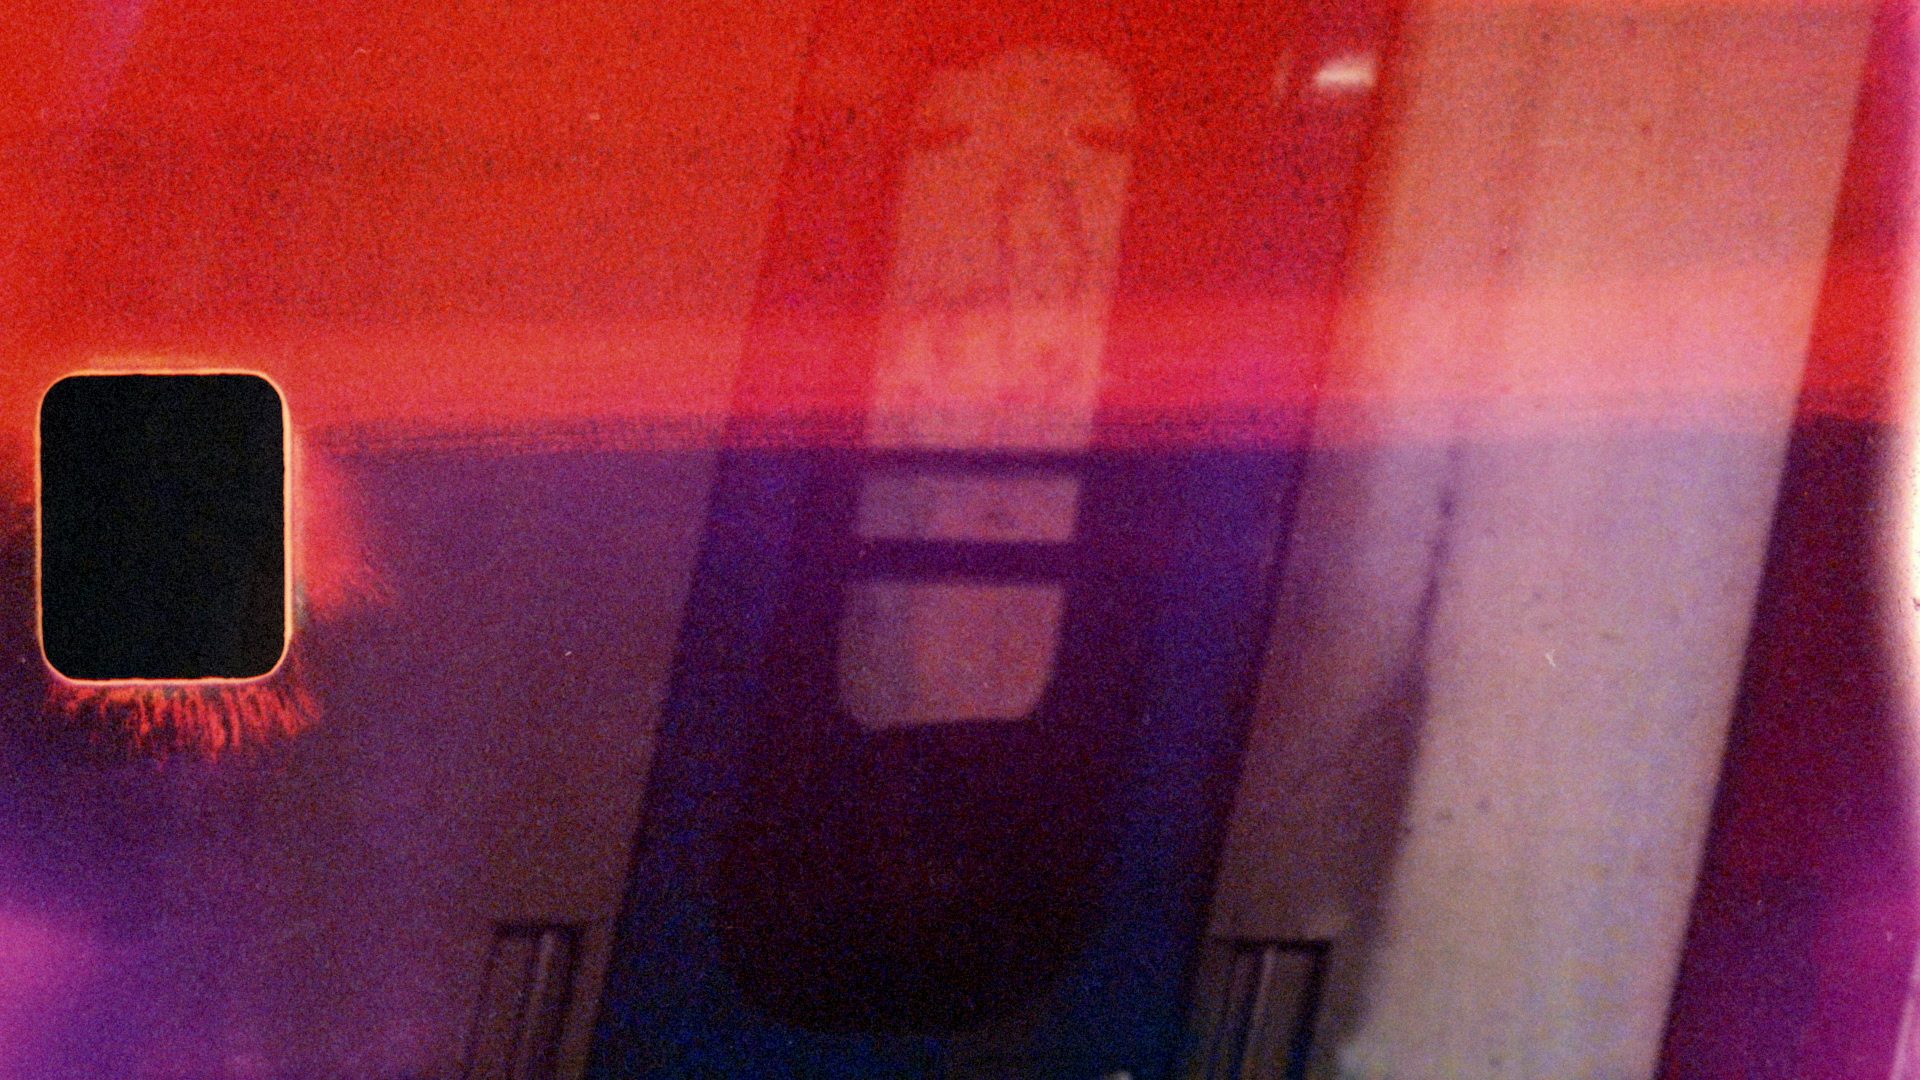 Still abstract image of a pink reflection of a train carriage from the music video for ATK by Bonobo